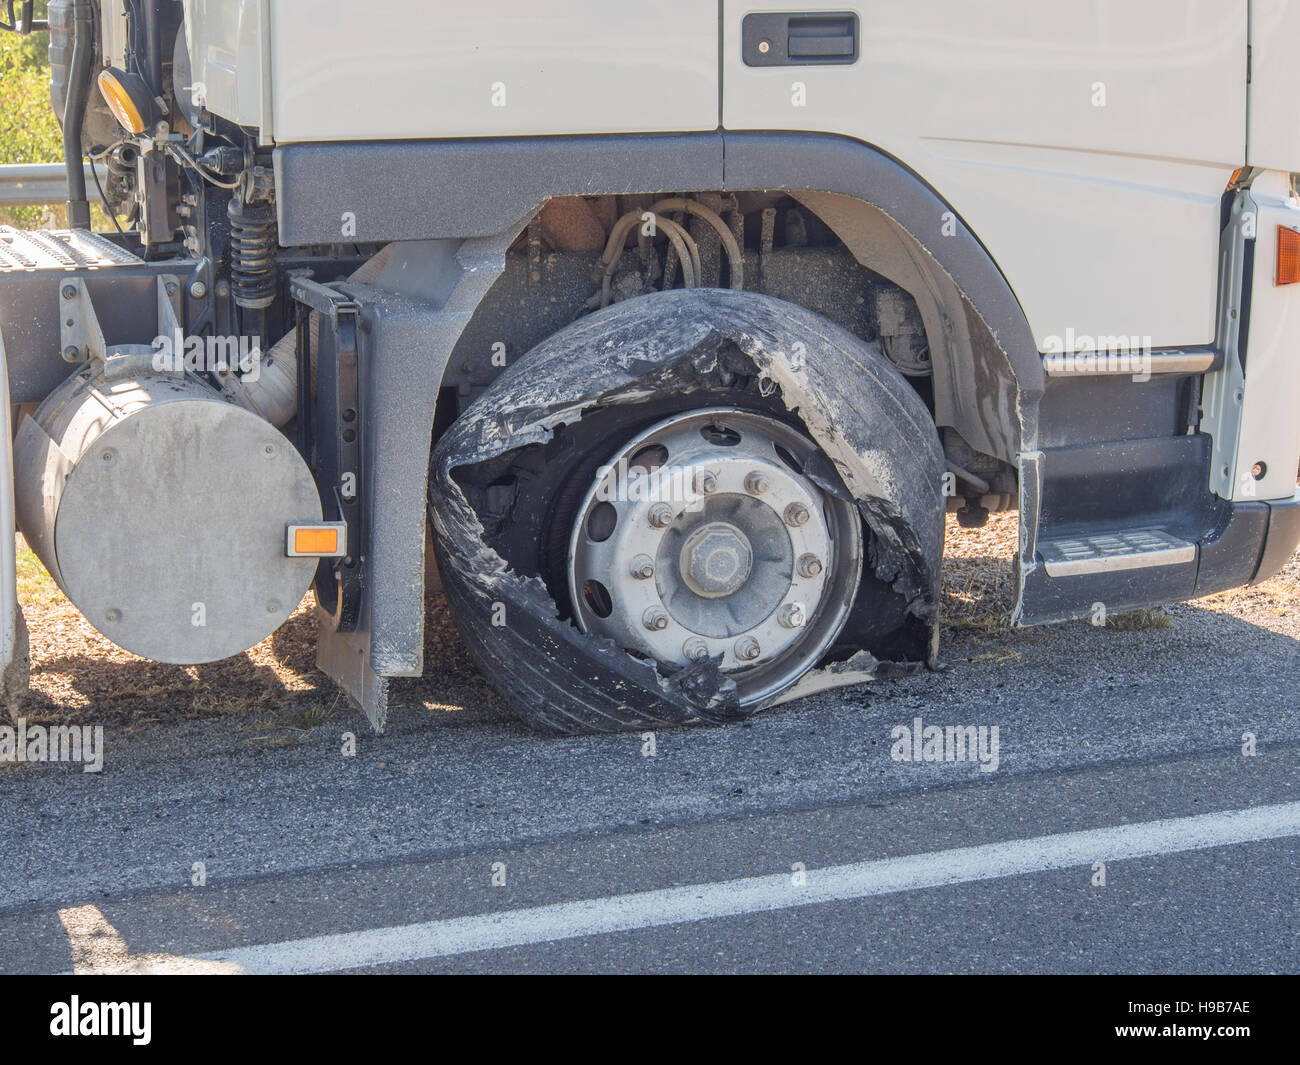 Blown truck tire after tire explosion at high speed Stock Photo